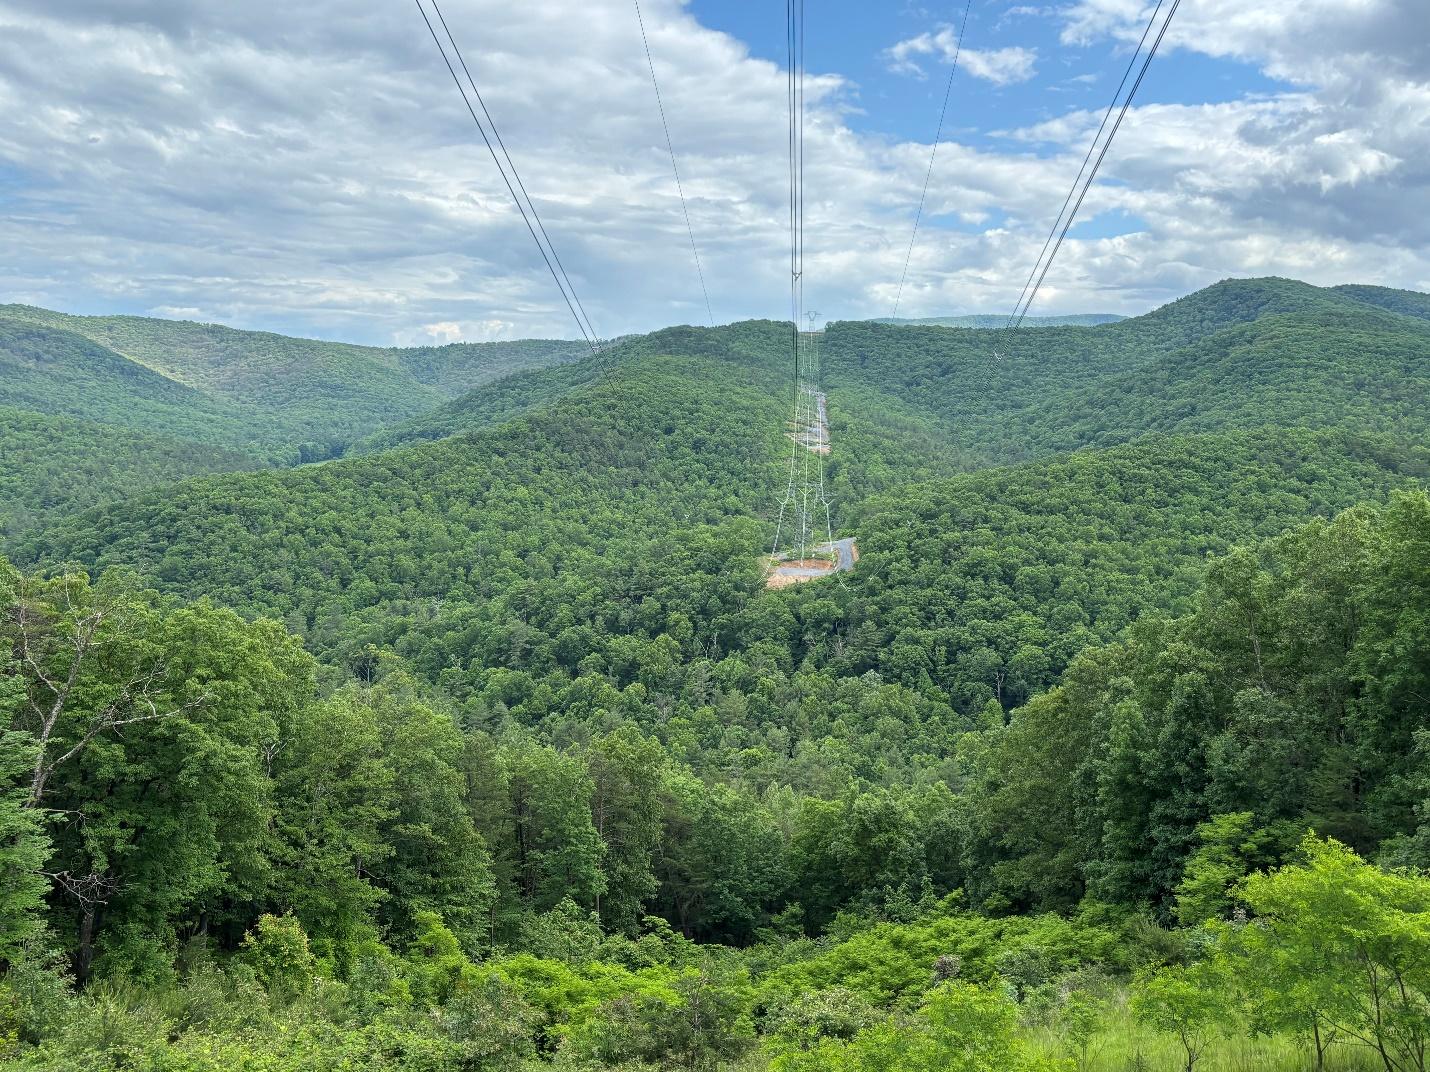 A cable car in the middle of a forest

Description automatically generated